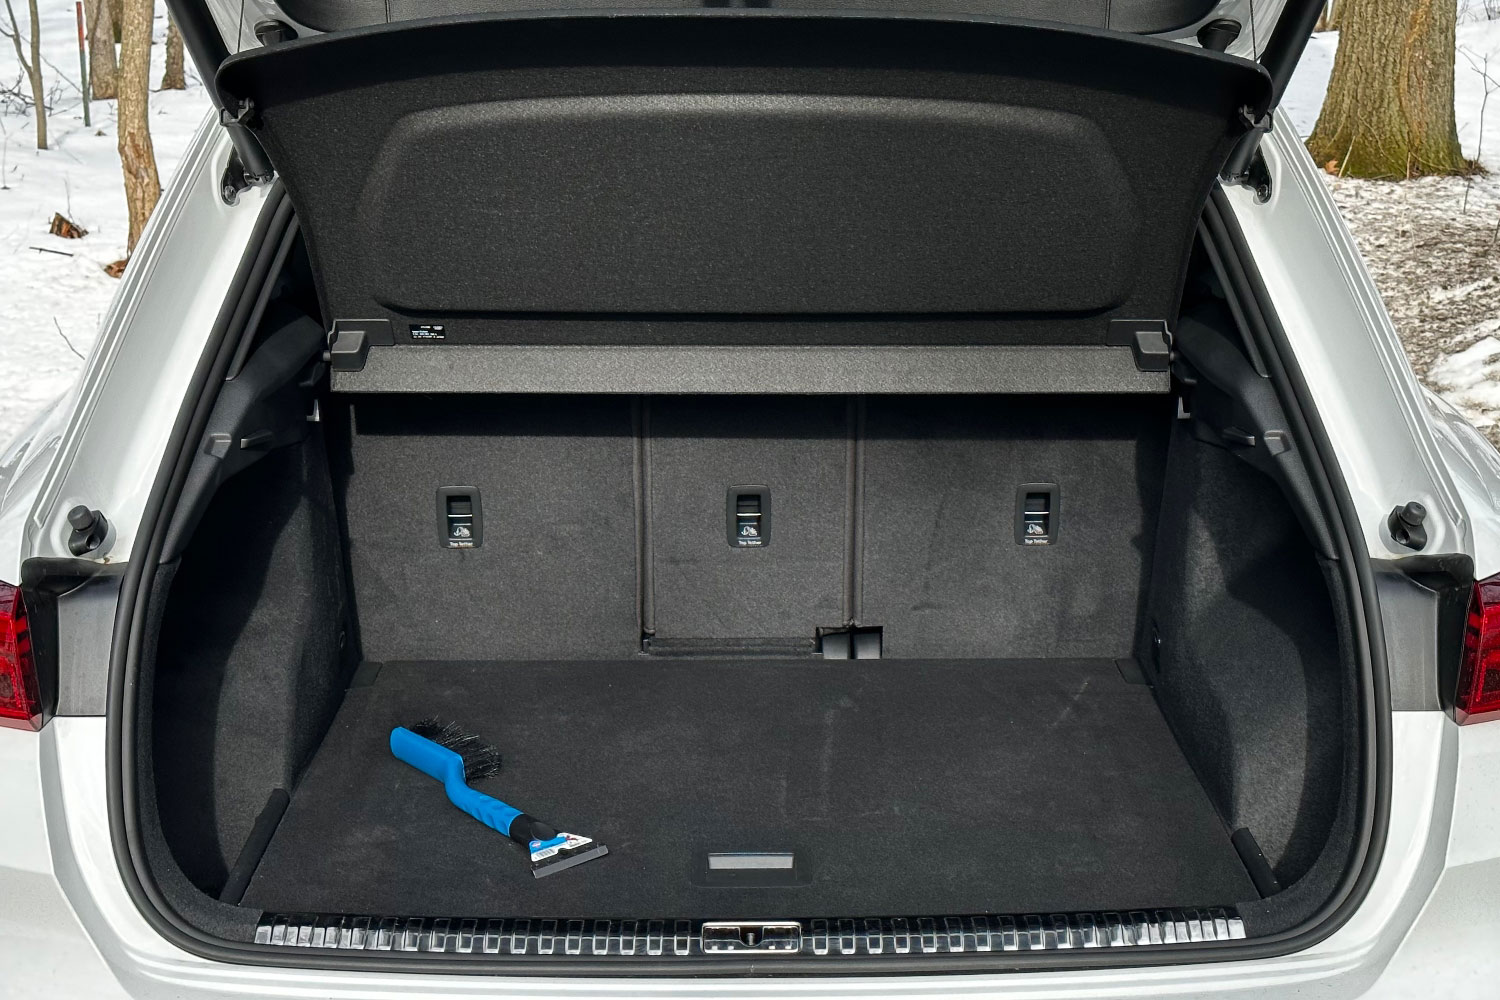 The cargo space of an Audi Q3.